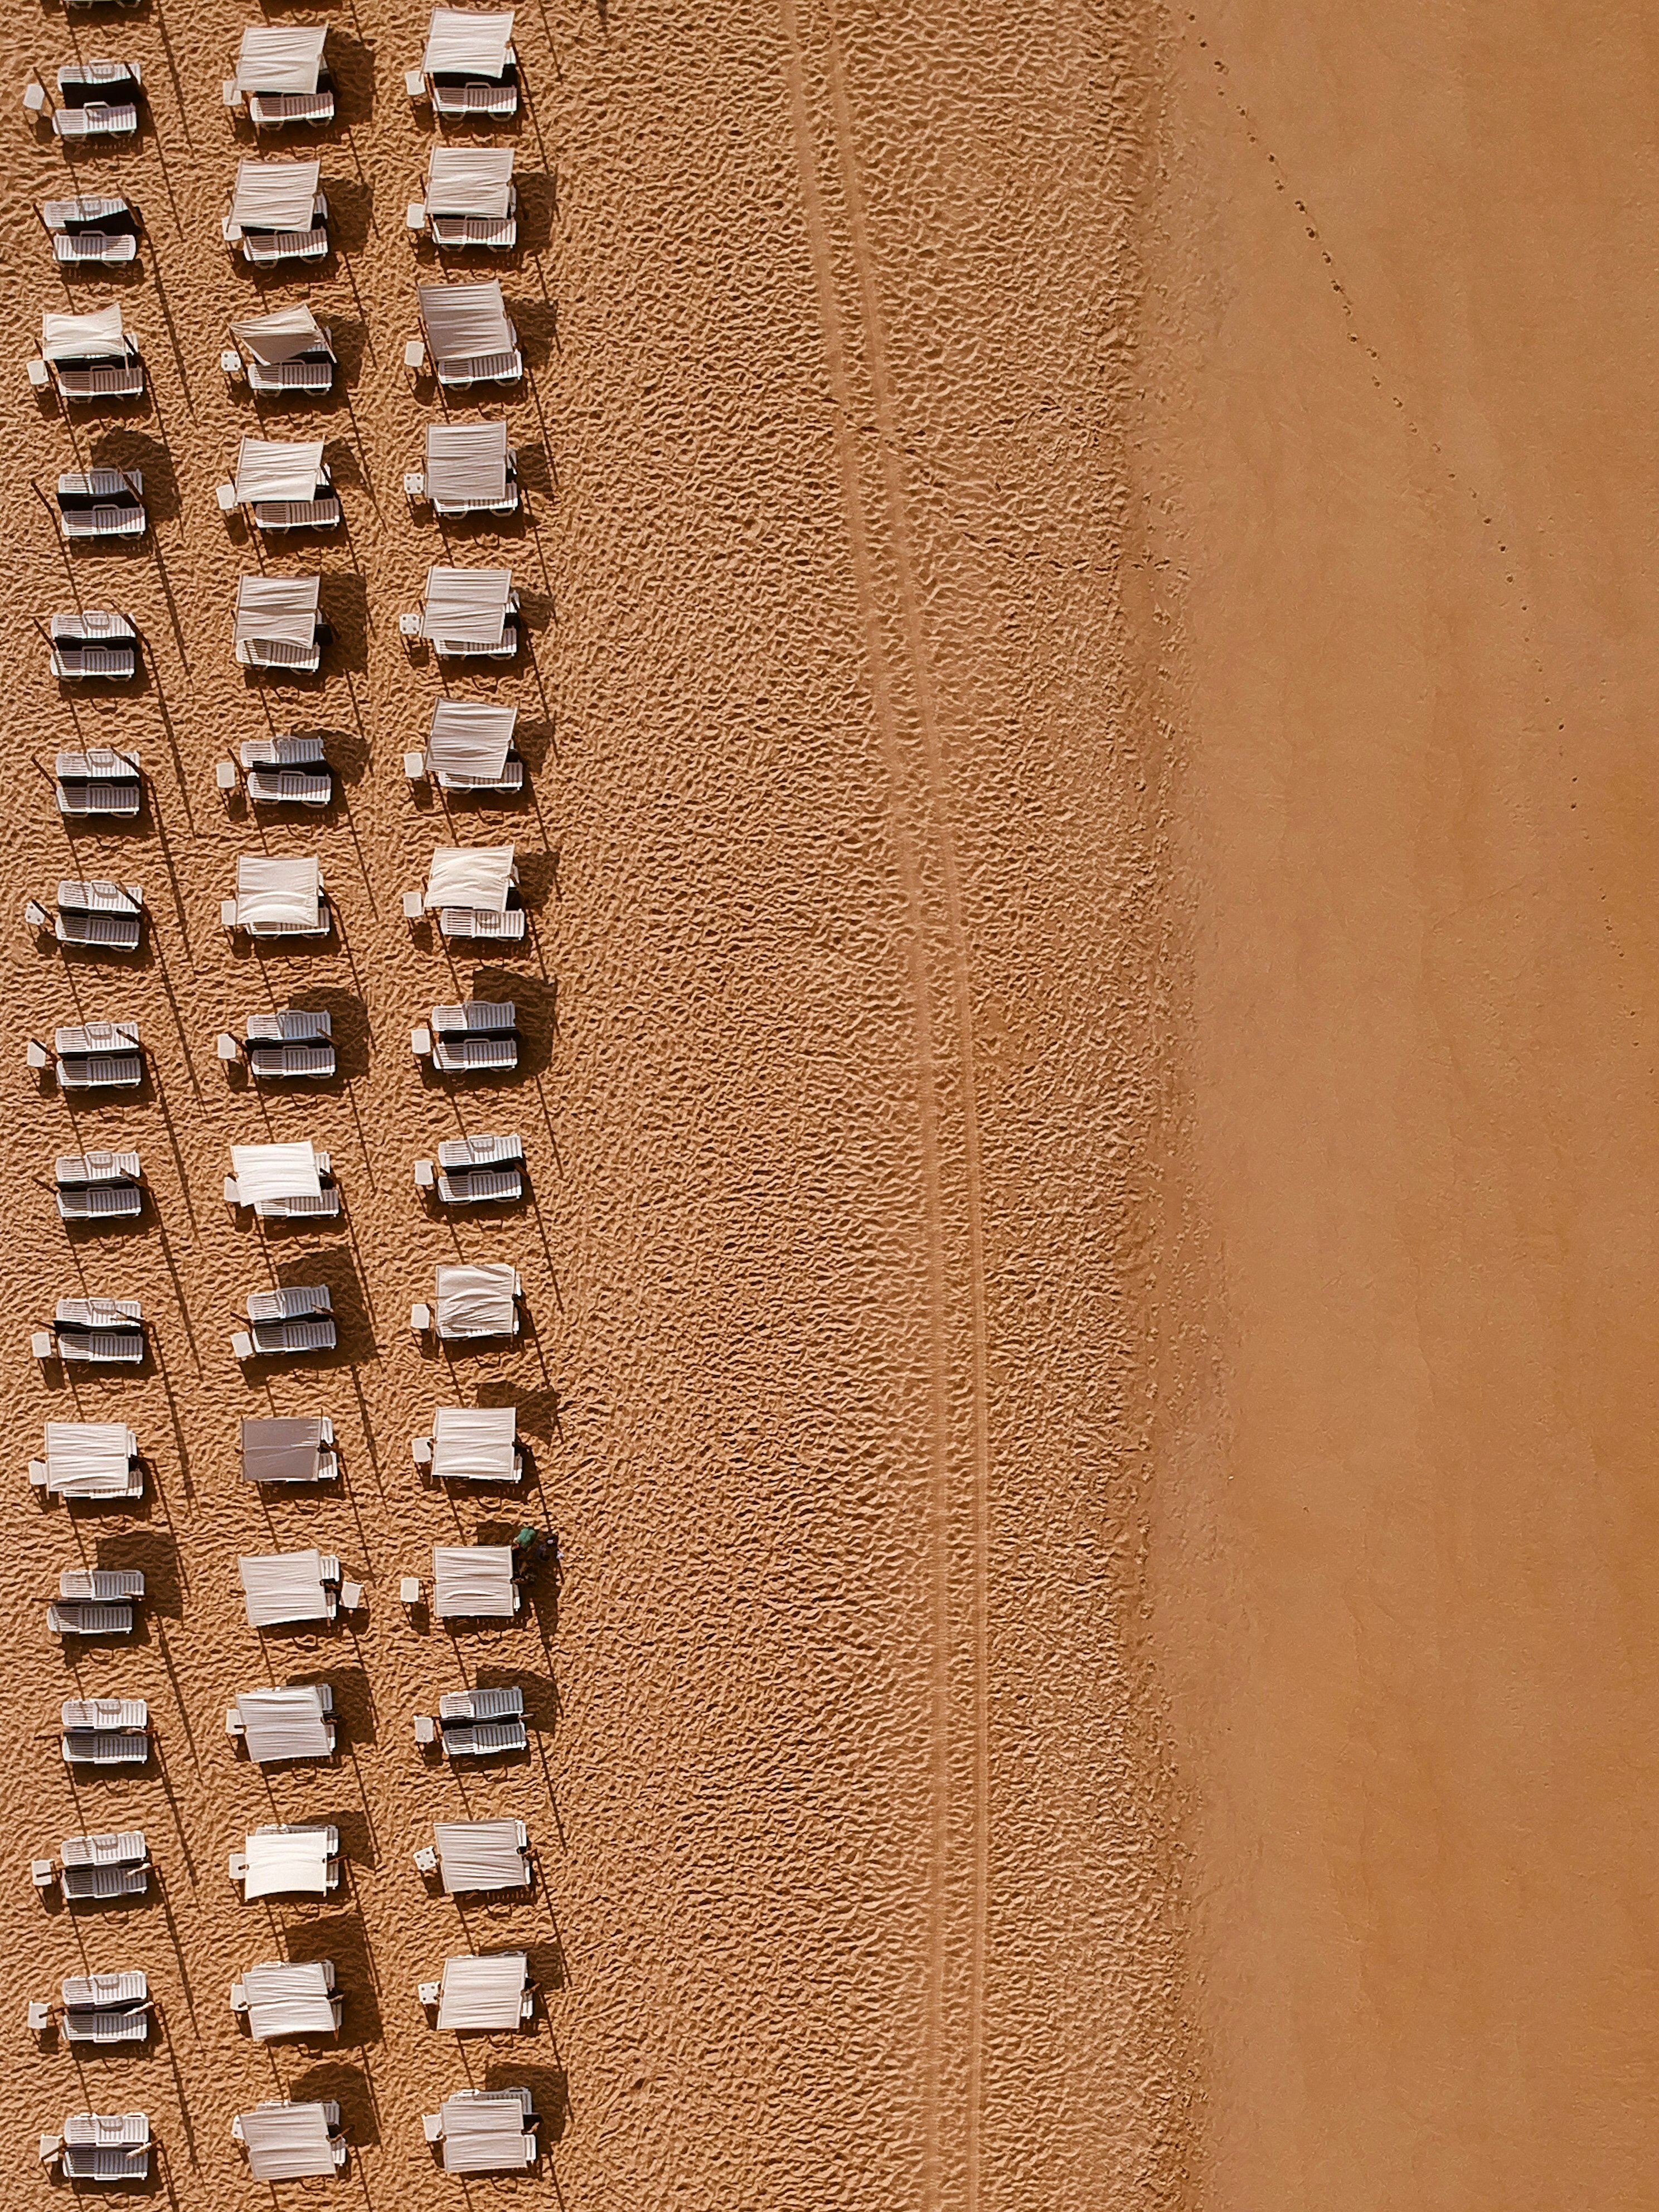 aerial photography of sunloungers